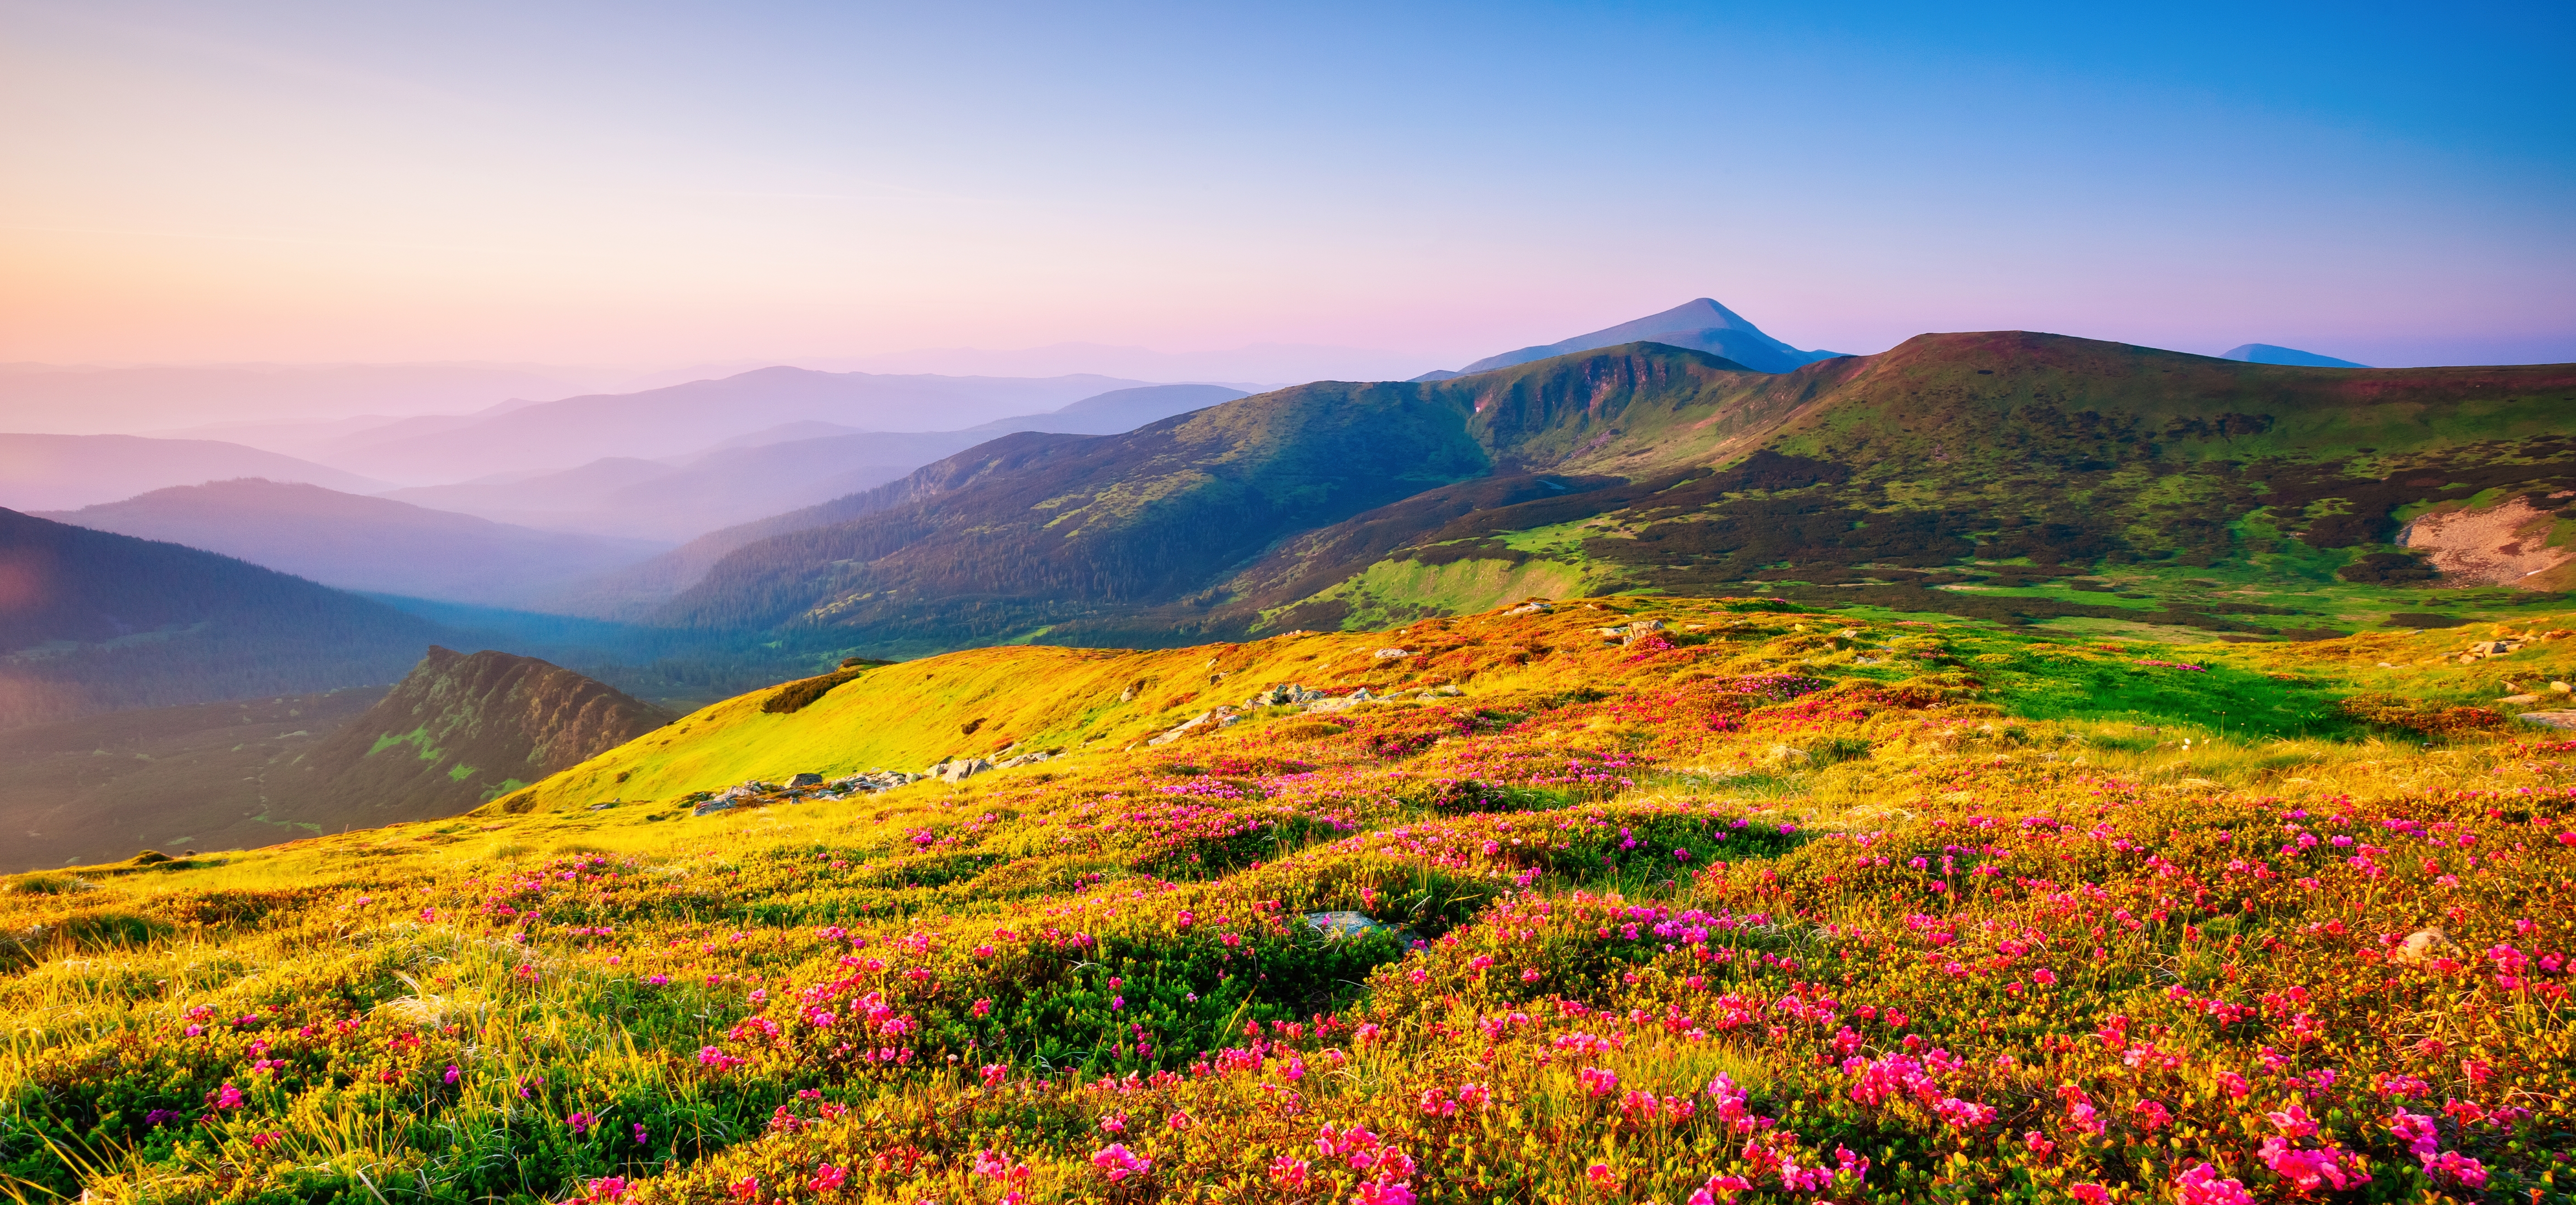 mountains and a field of pink flowers